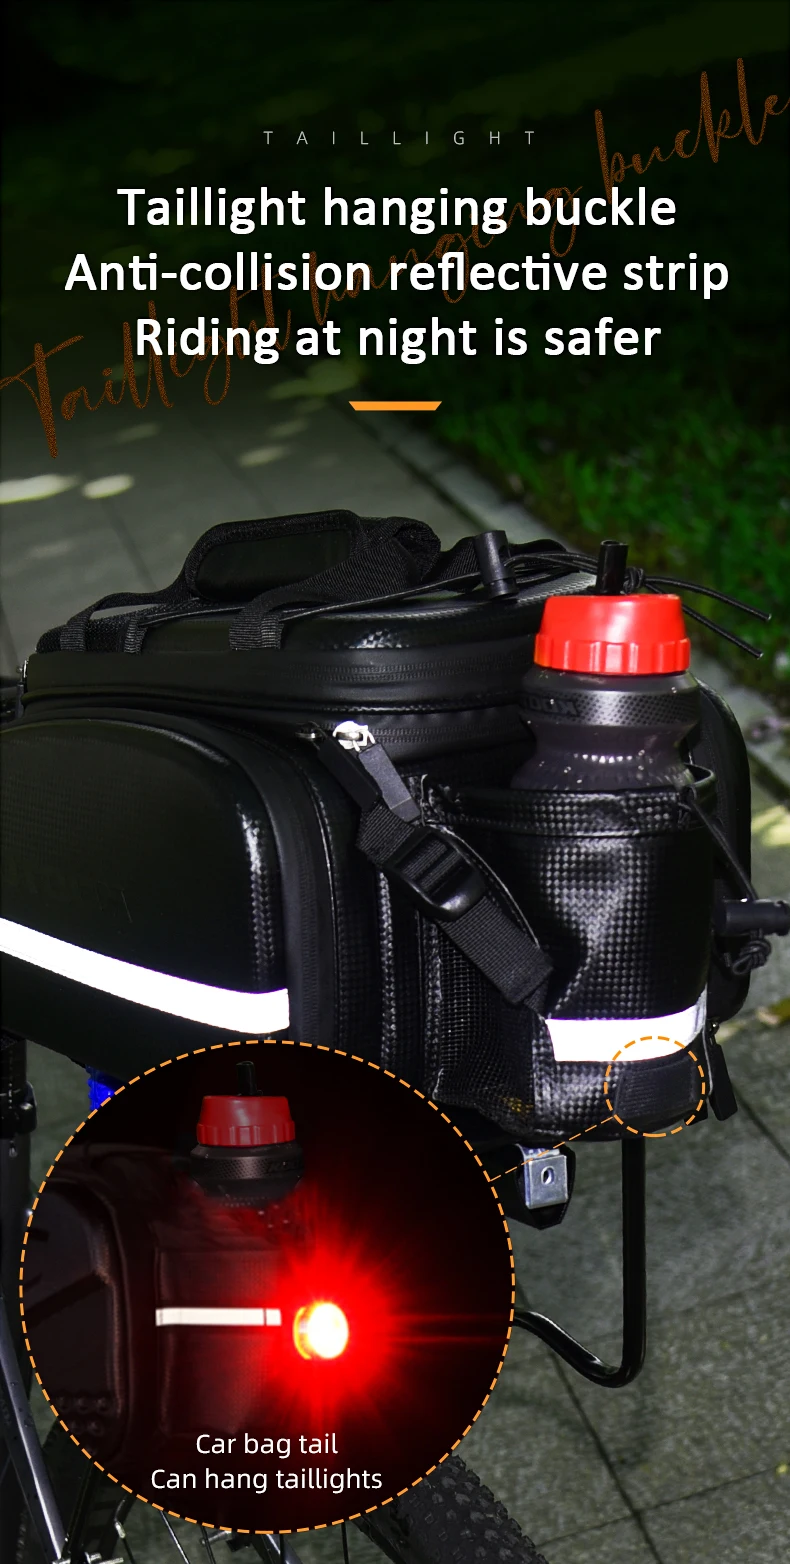 KOOTU bicycle trunk bag can install the tail light when you are riding in the night